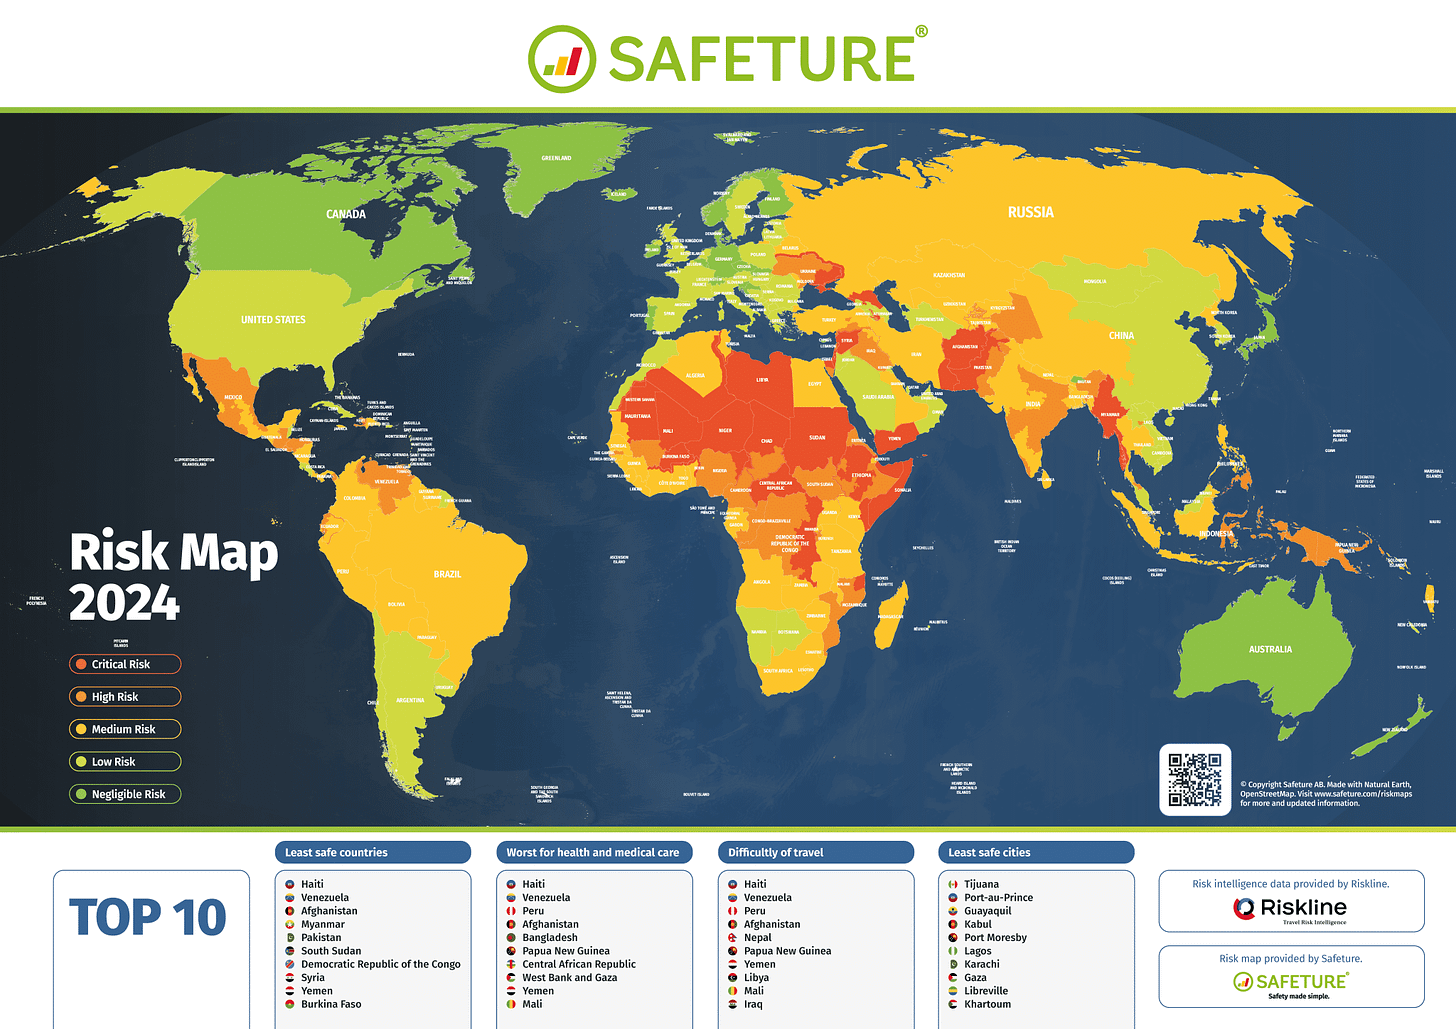 Travel risk map by country (from Safeture).